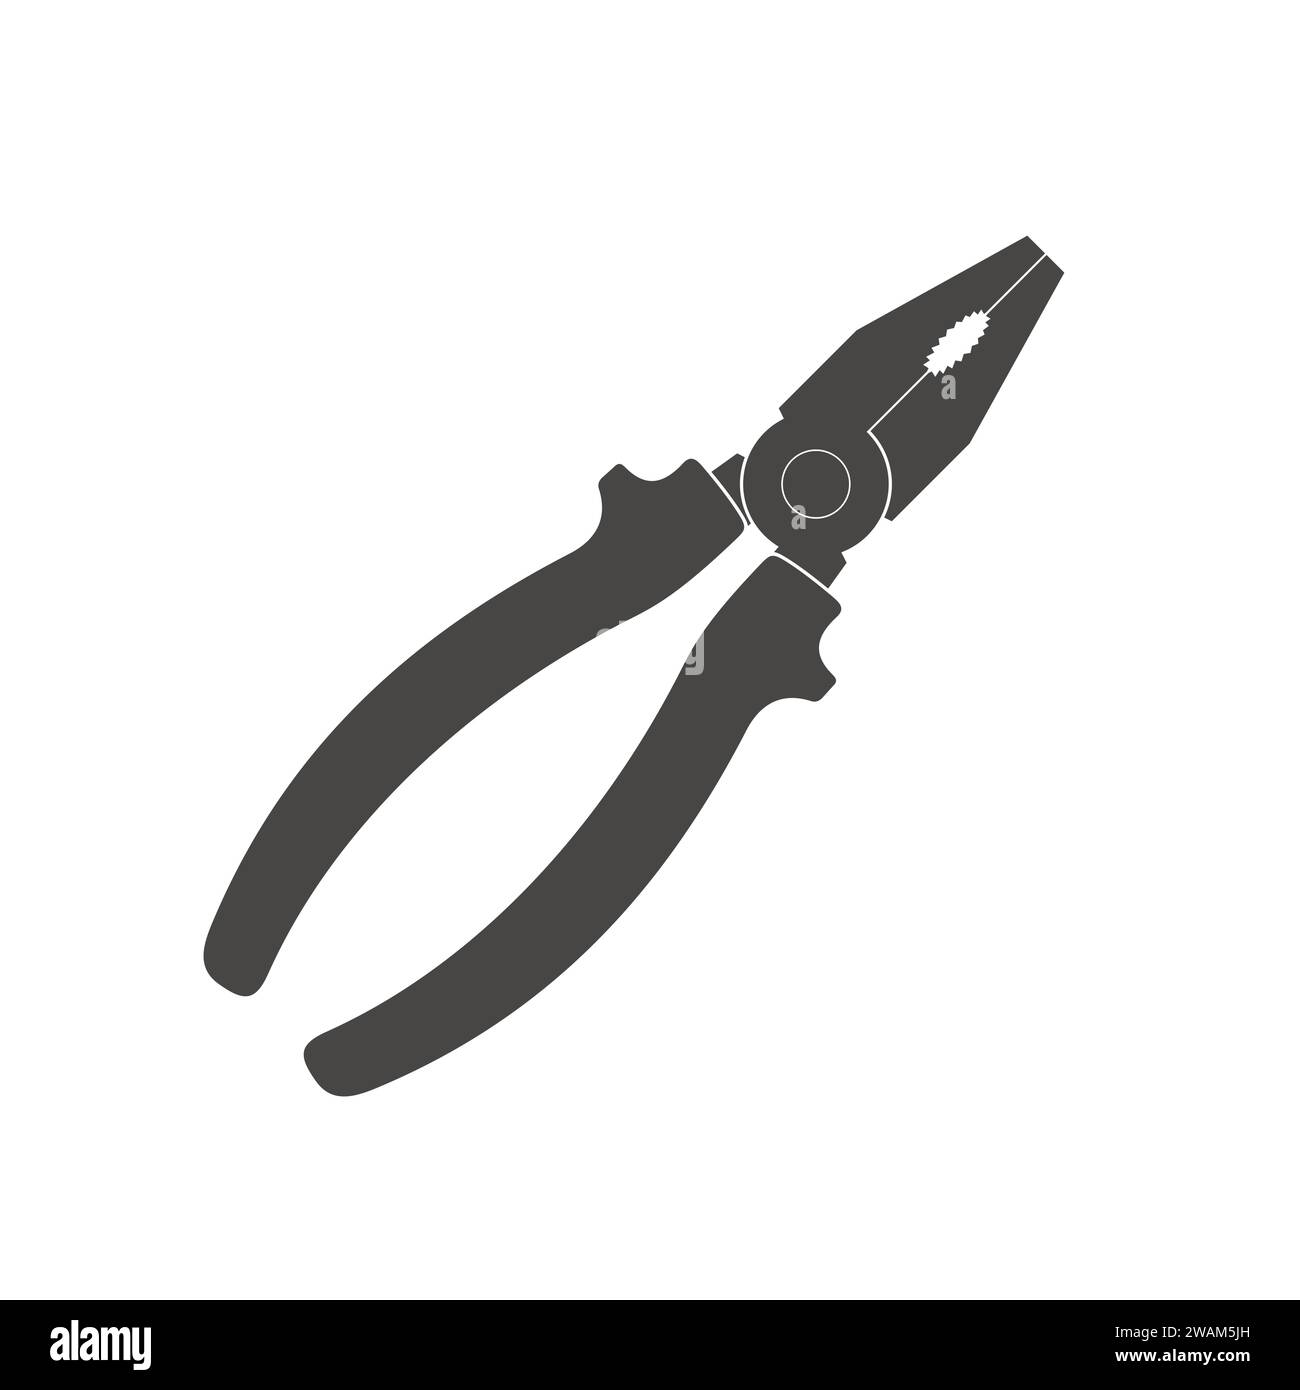 Pliers icon isolated on white background. Builder, construction and repair hand tools with plastic handles. Pliers vector illustration Stock Vector